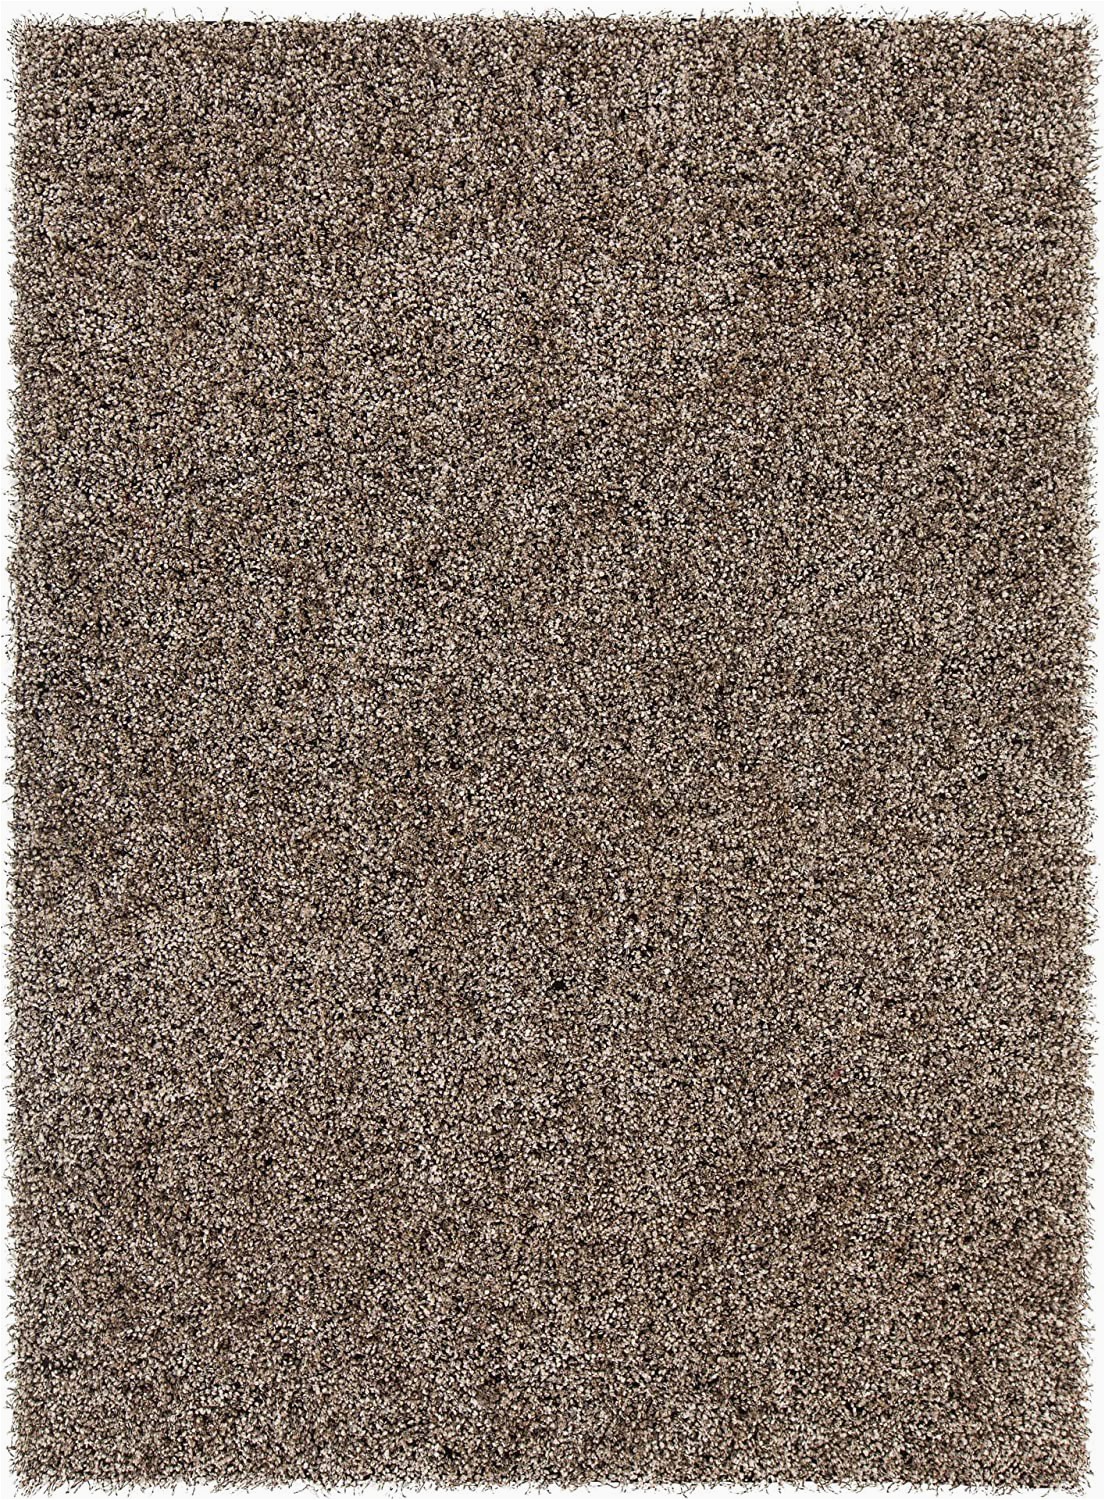 36 X 60 area Rug Amazon Chandra Rugs Blossom area Rug 60 Inch by 84